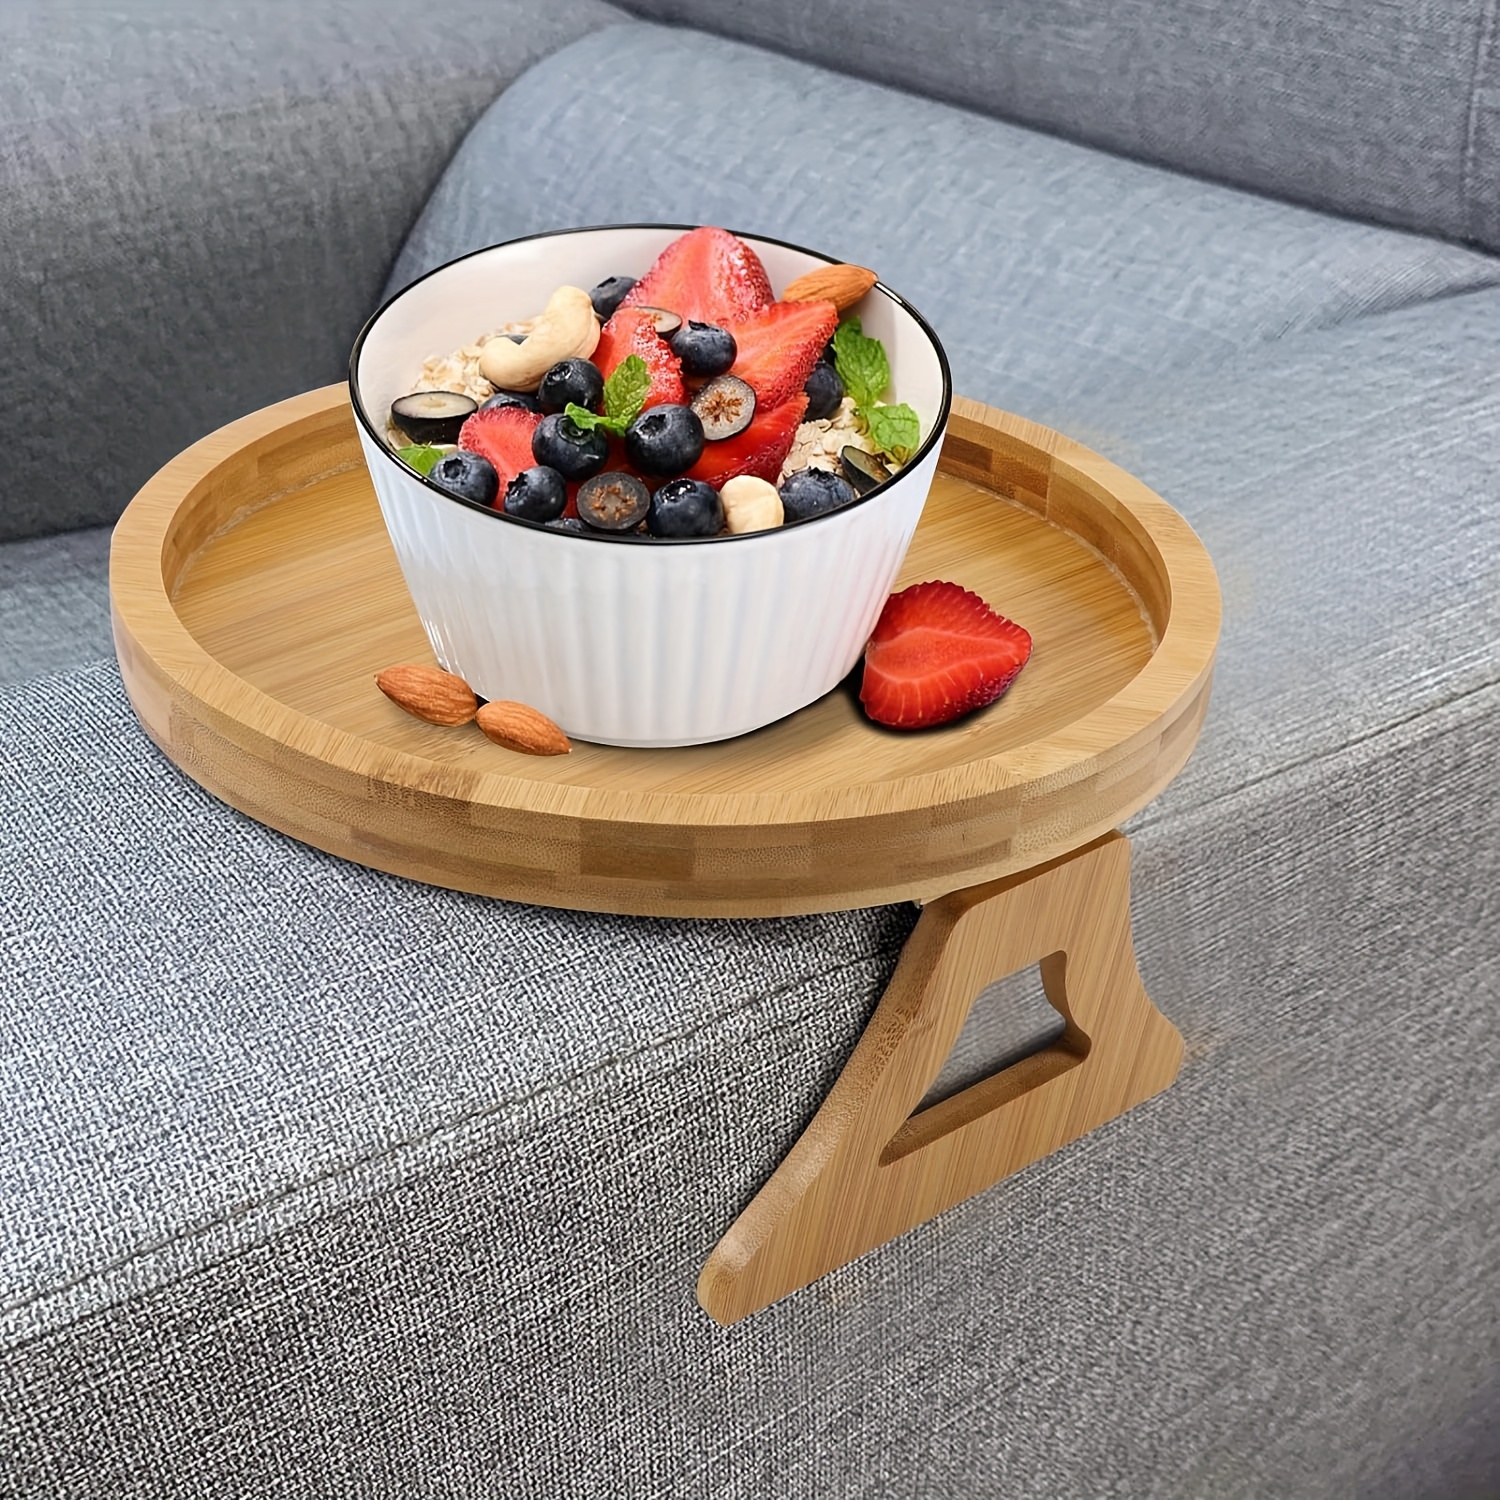 

1pc, Clip-on Tray For Sofa Armrest, Wooden Sofa Arm Tray, Retractable Sofa Tray Table Clip, Foldable Snack Tray Fits Securely Into The Sofa Or Coffee Table, Perfect Gift For Family And Friends